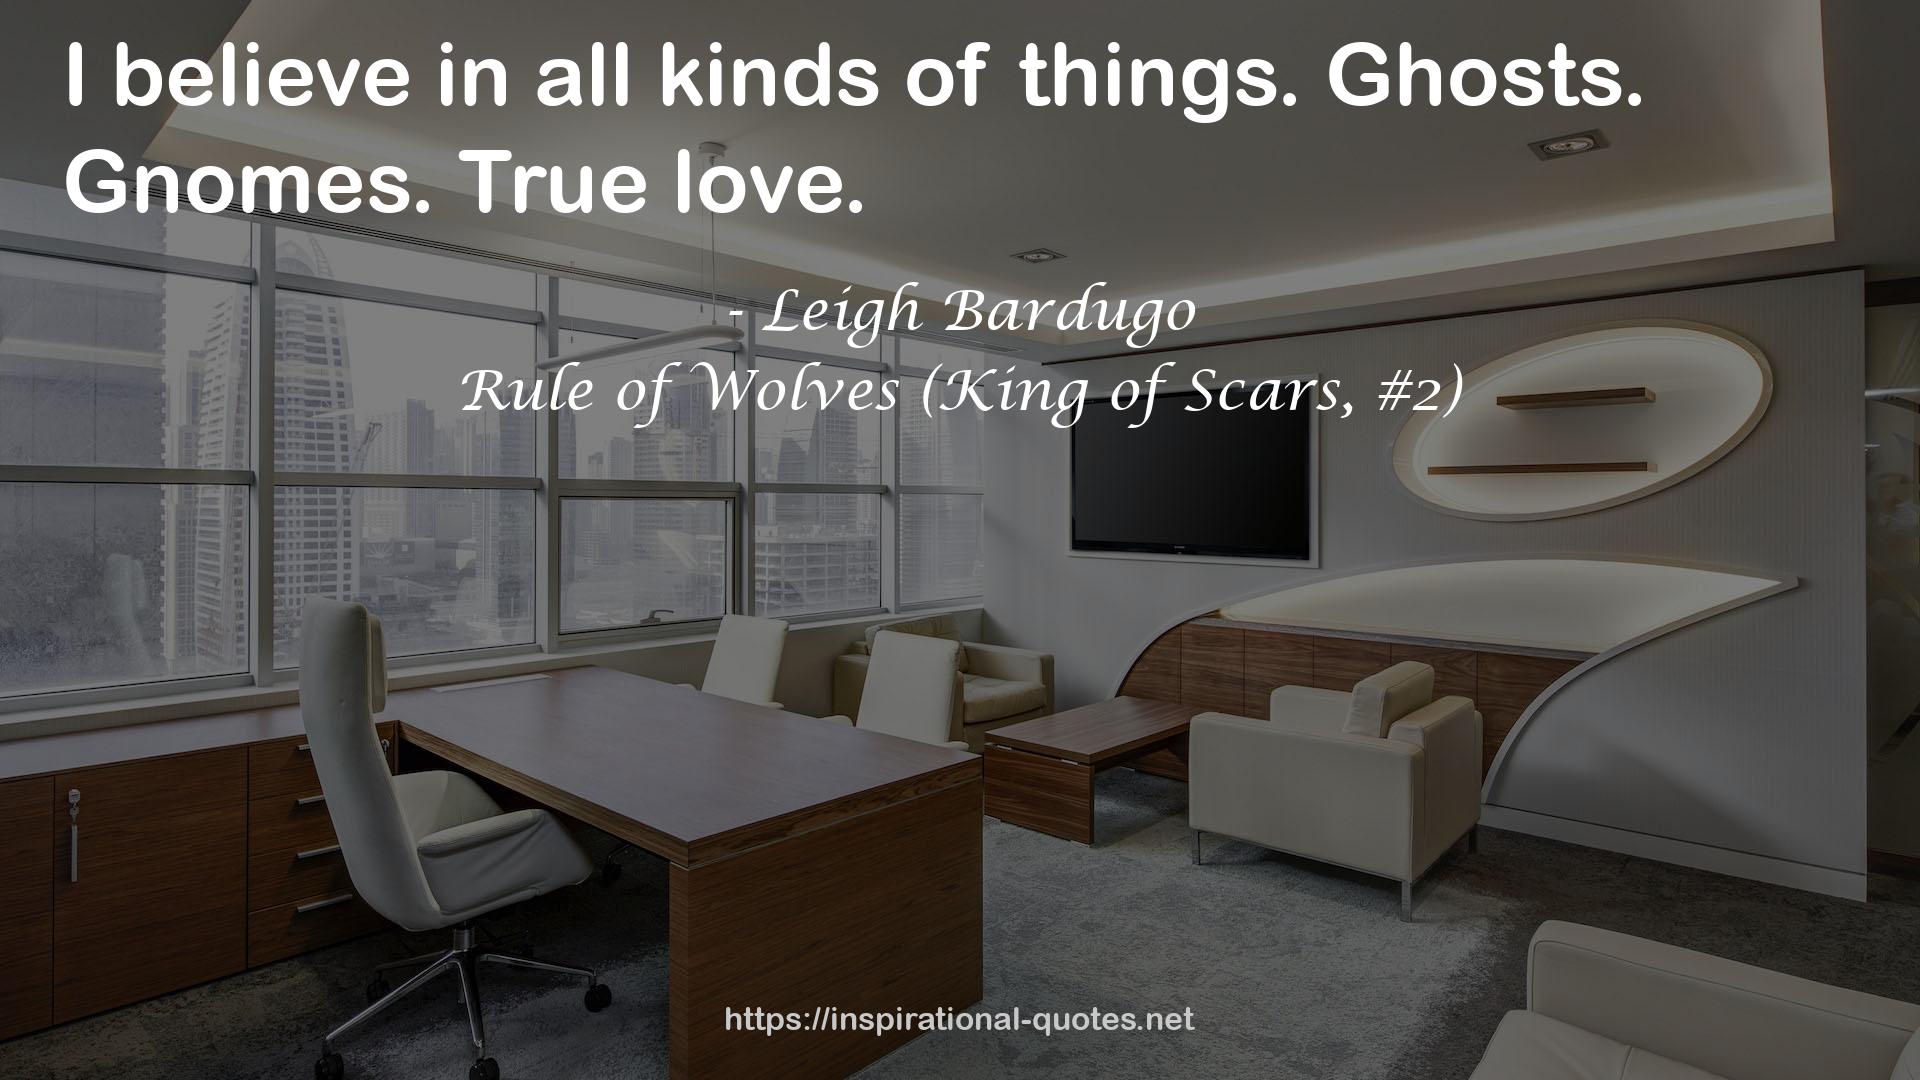 Rule of Wolves (King of Scars, #2) QUOTES